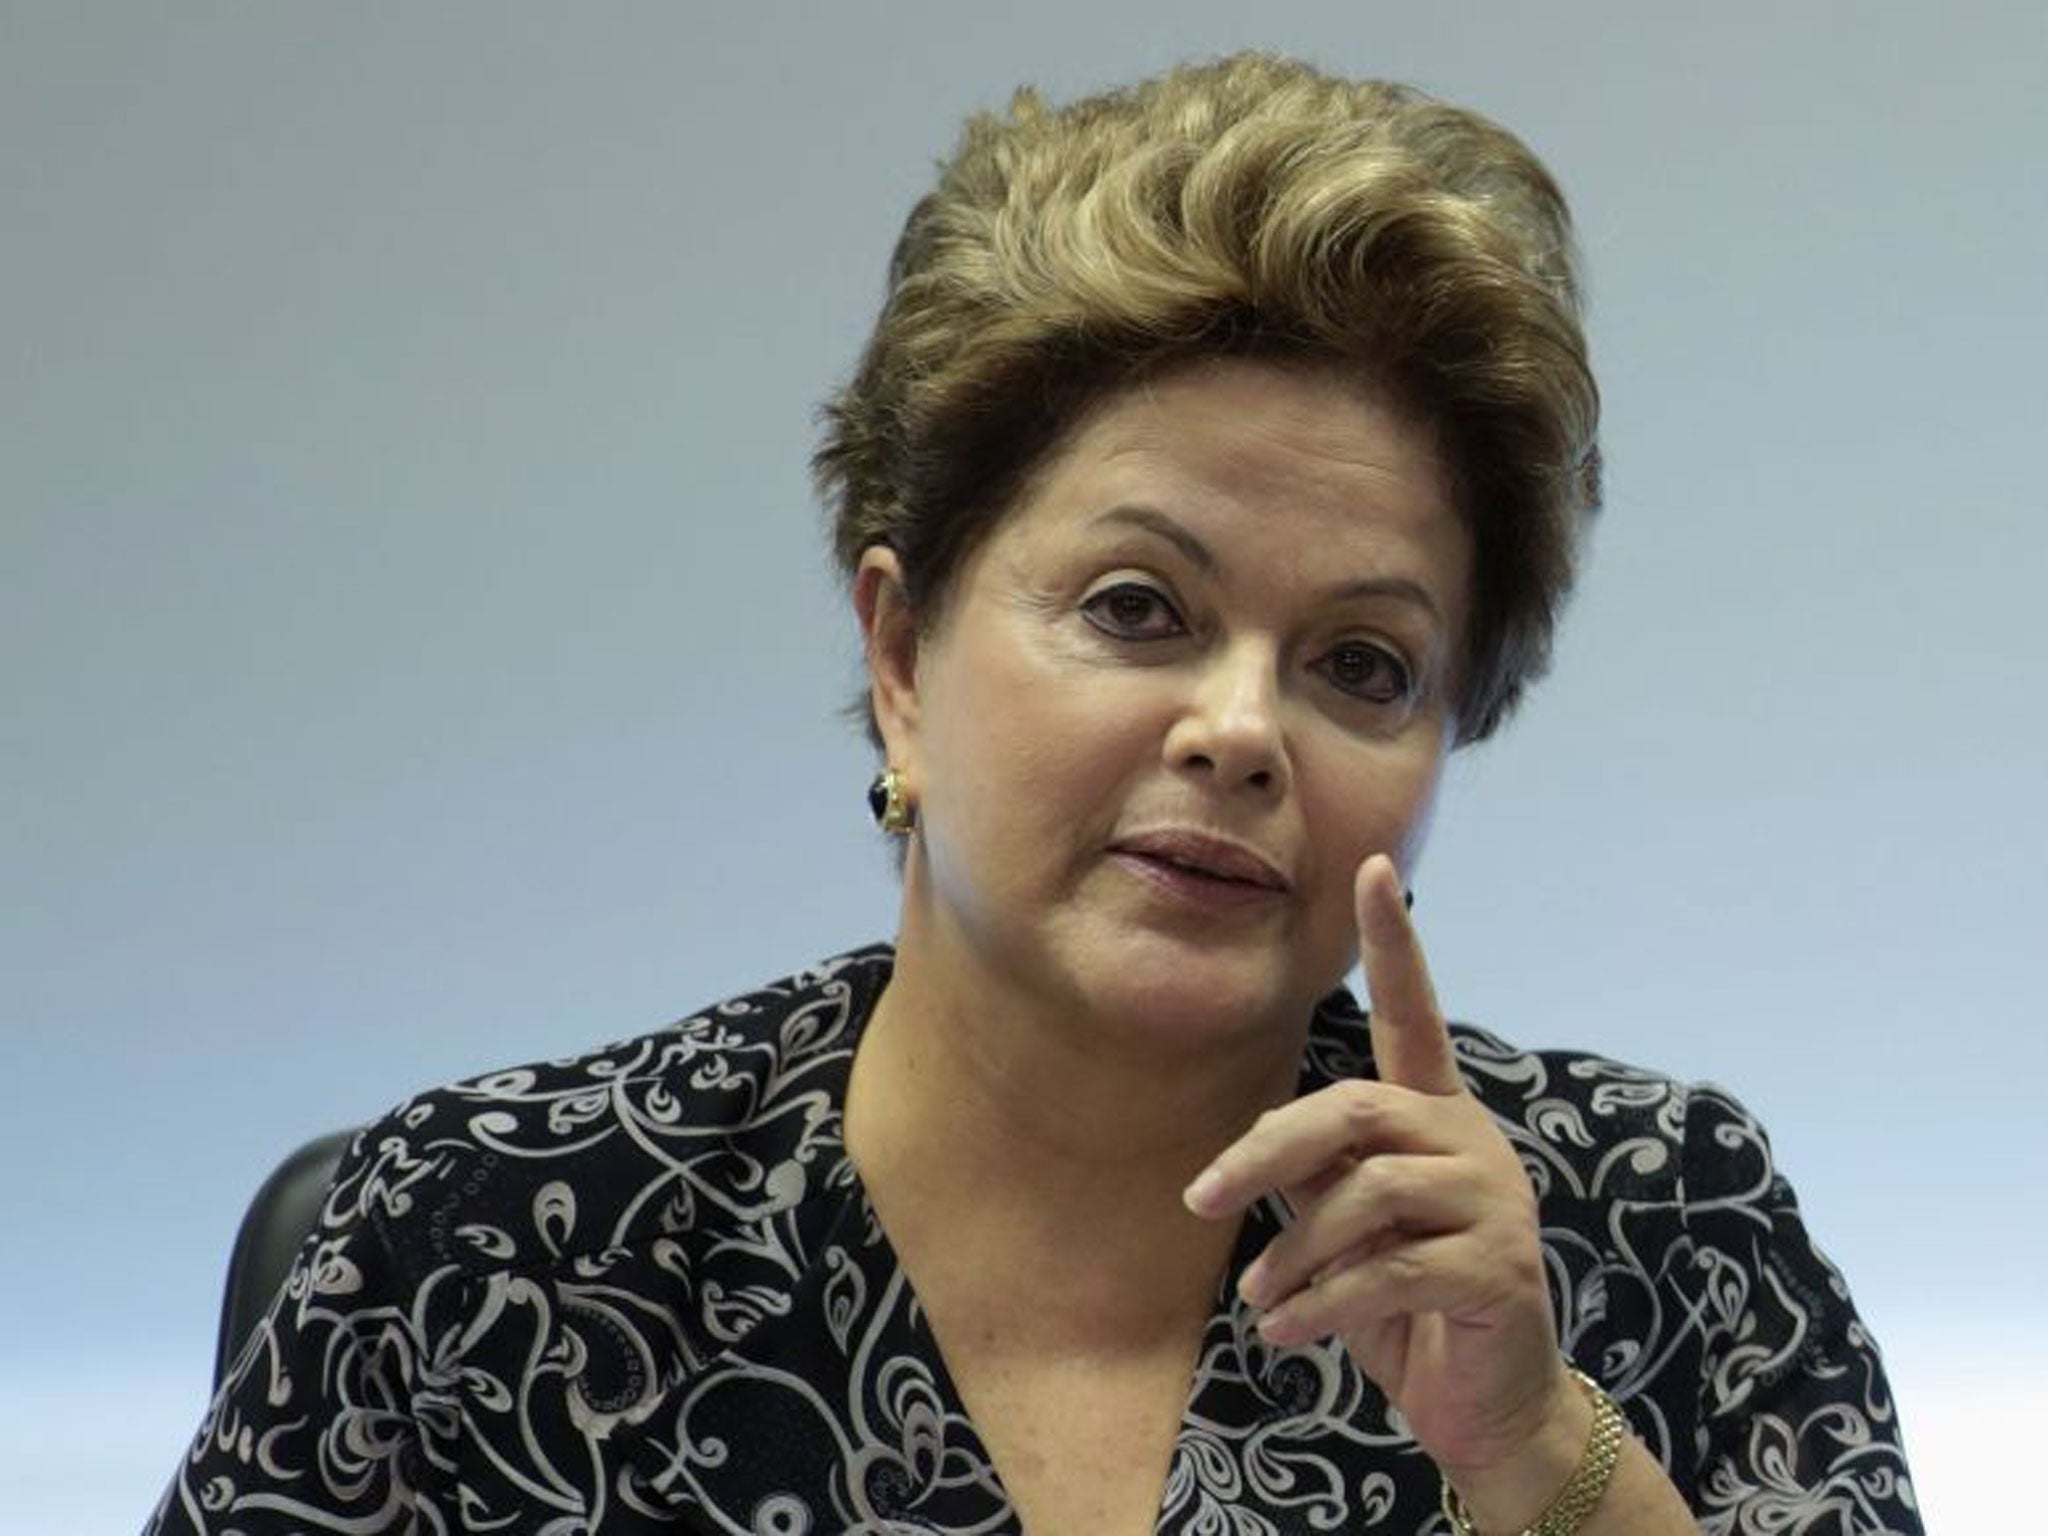 Dilma Vana Rousseff is a Brazilian economist and politician currently serving as the 36th President of Brazil. She is the first woman to hold the office